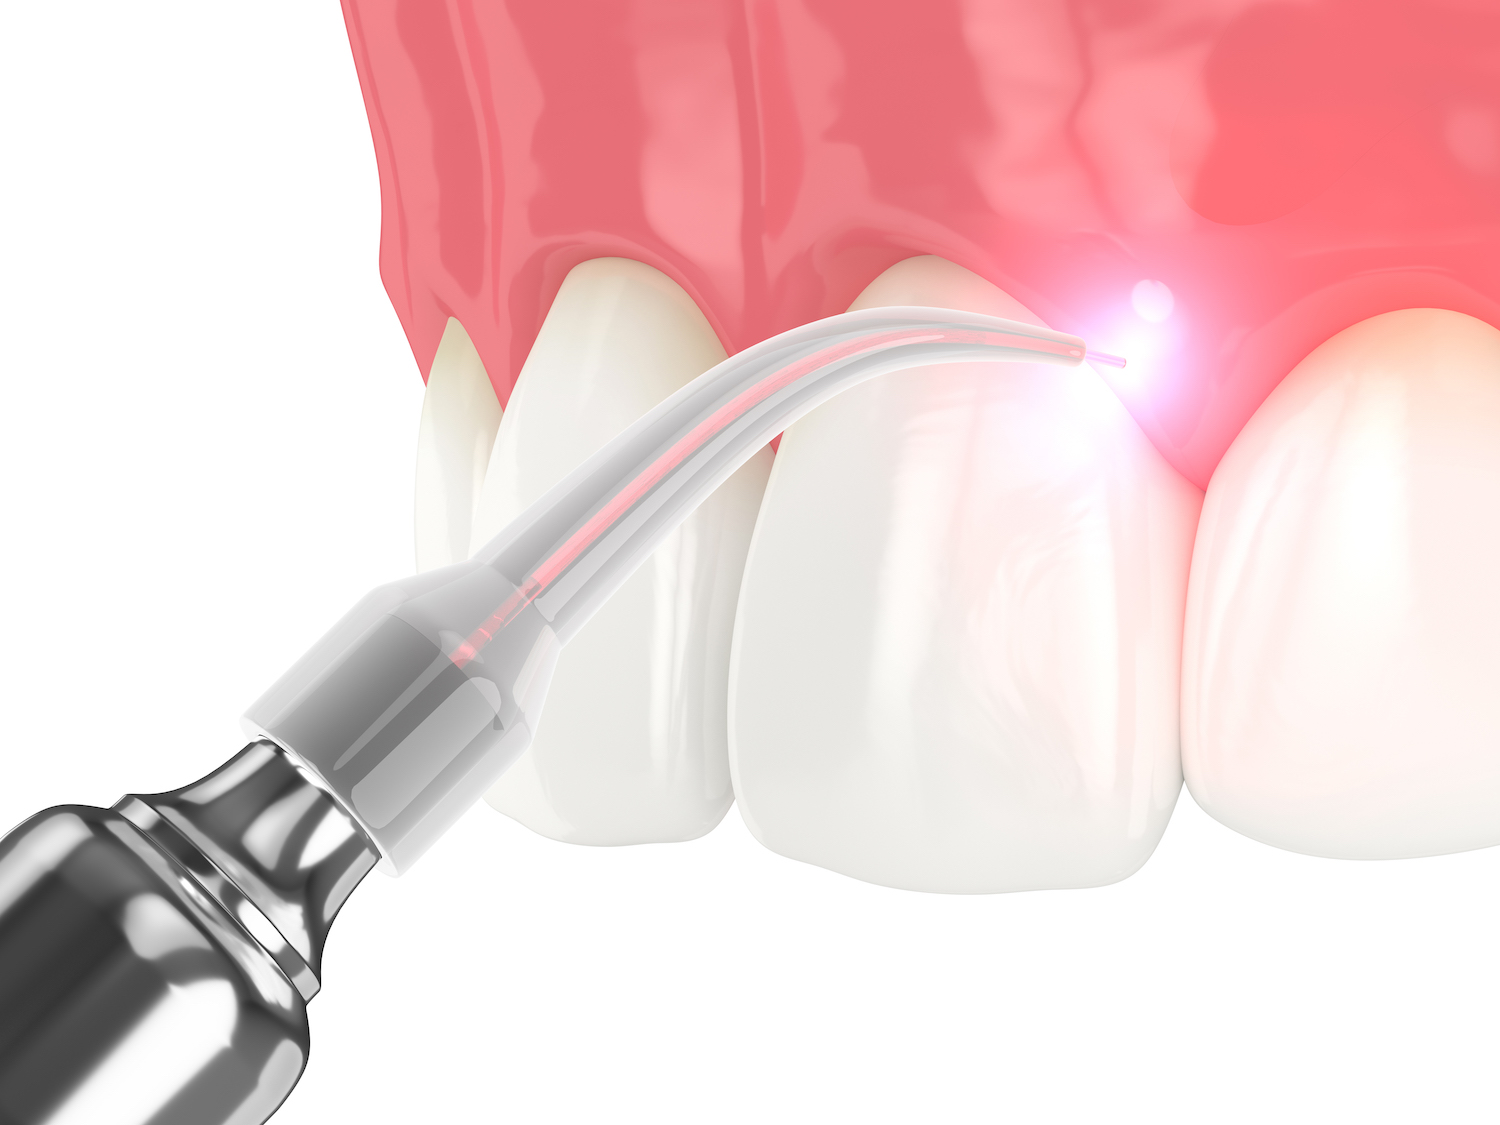 3d render of dental diode laser used to treat gums. The concept of using laser therapy in the treatment of gums. Example of modern dentistry